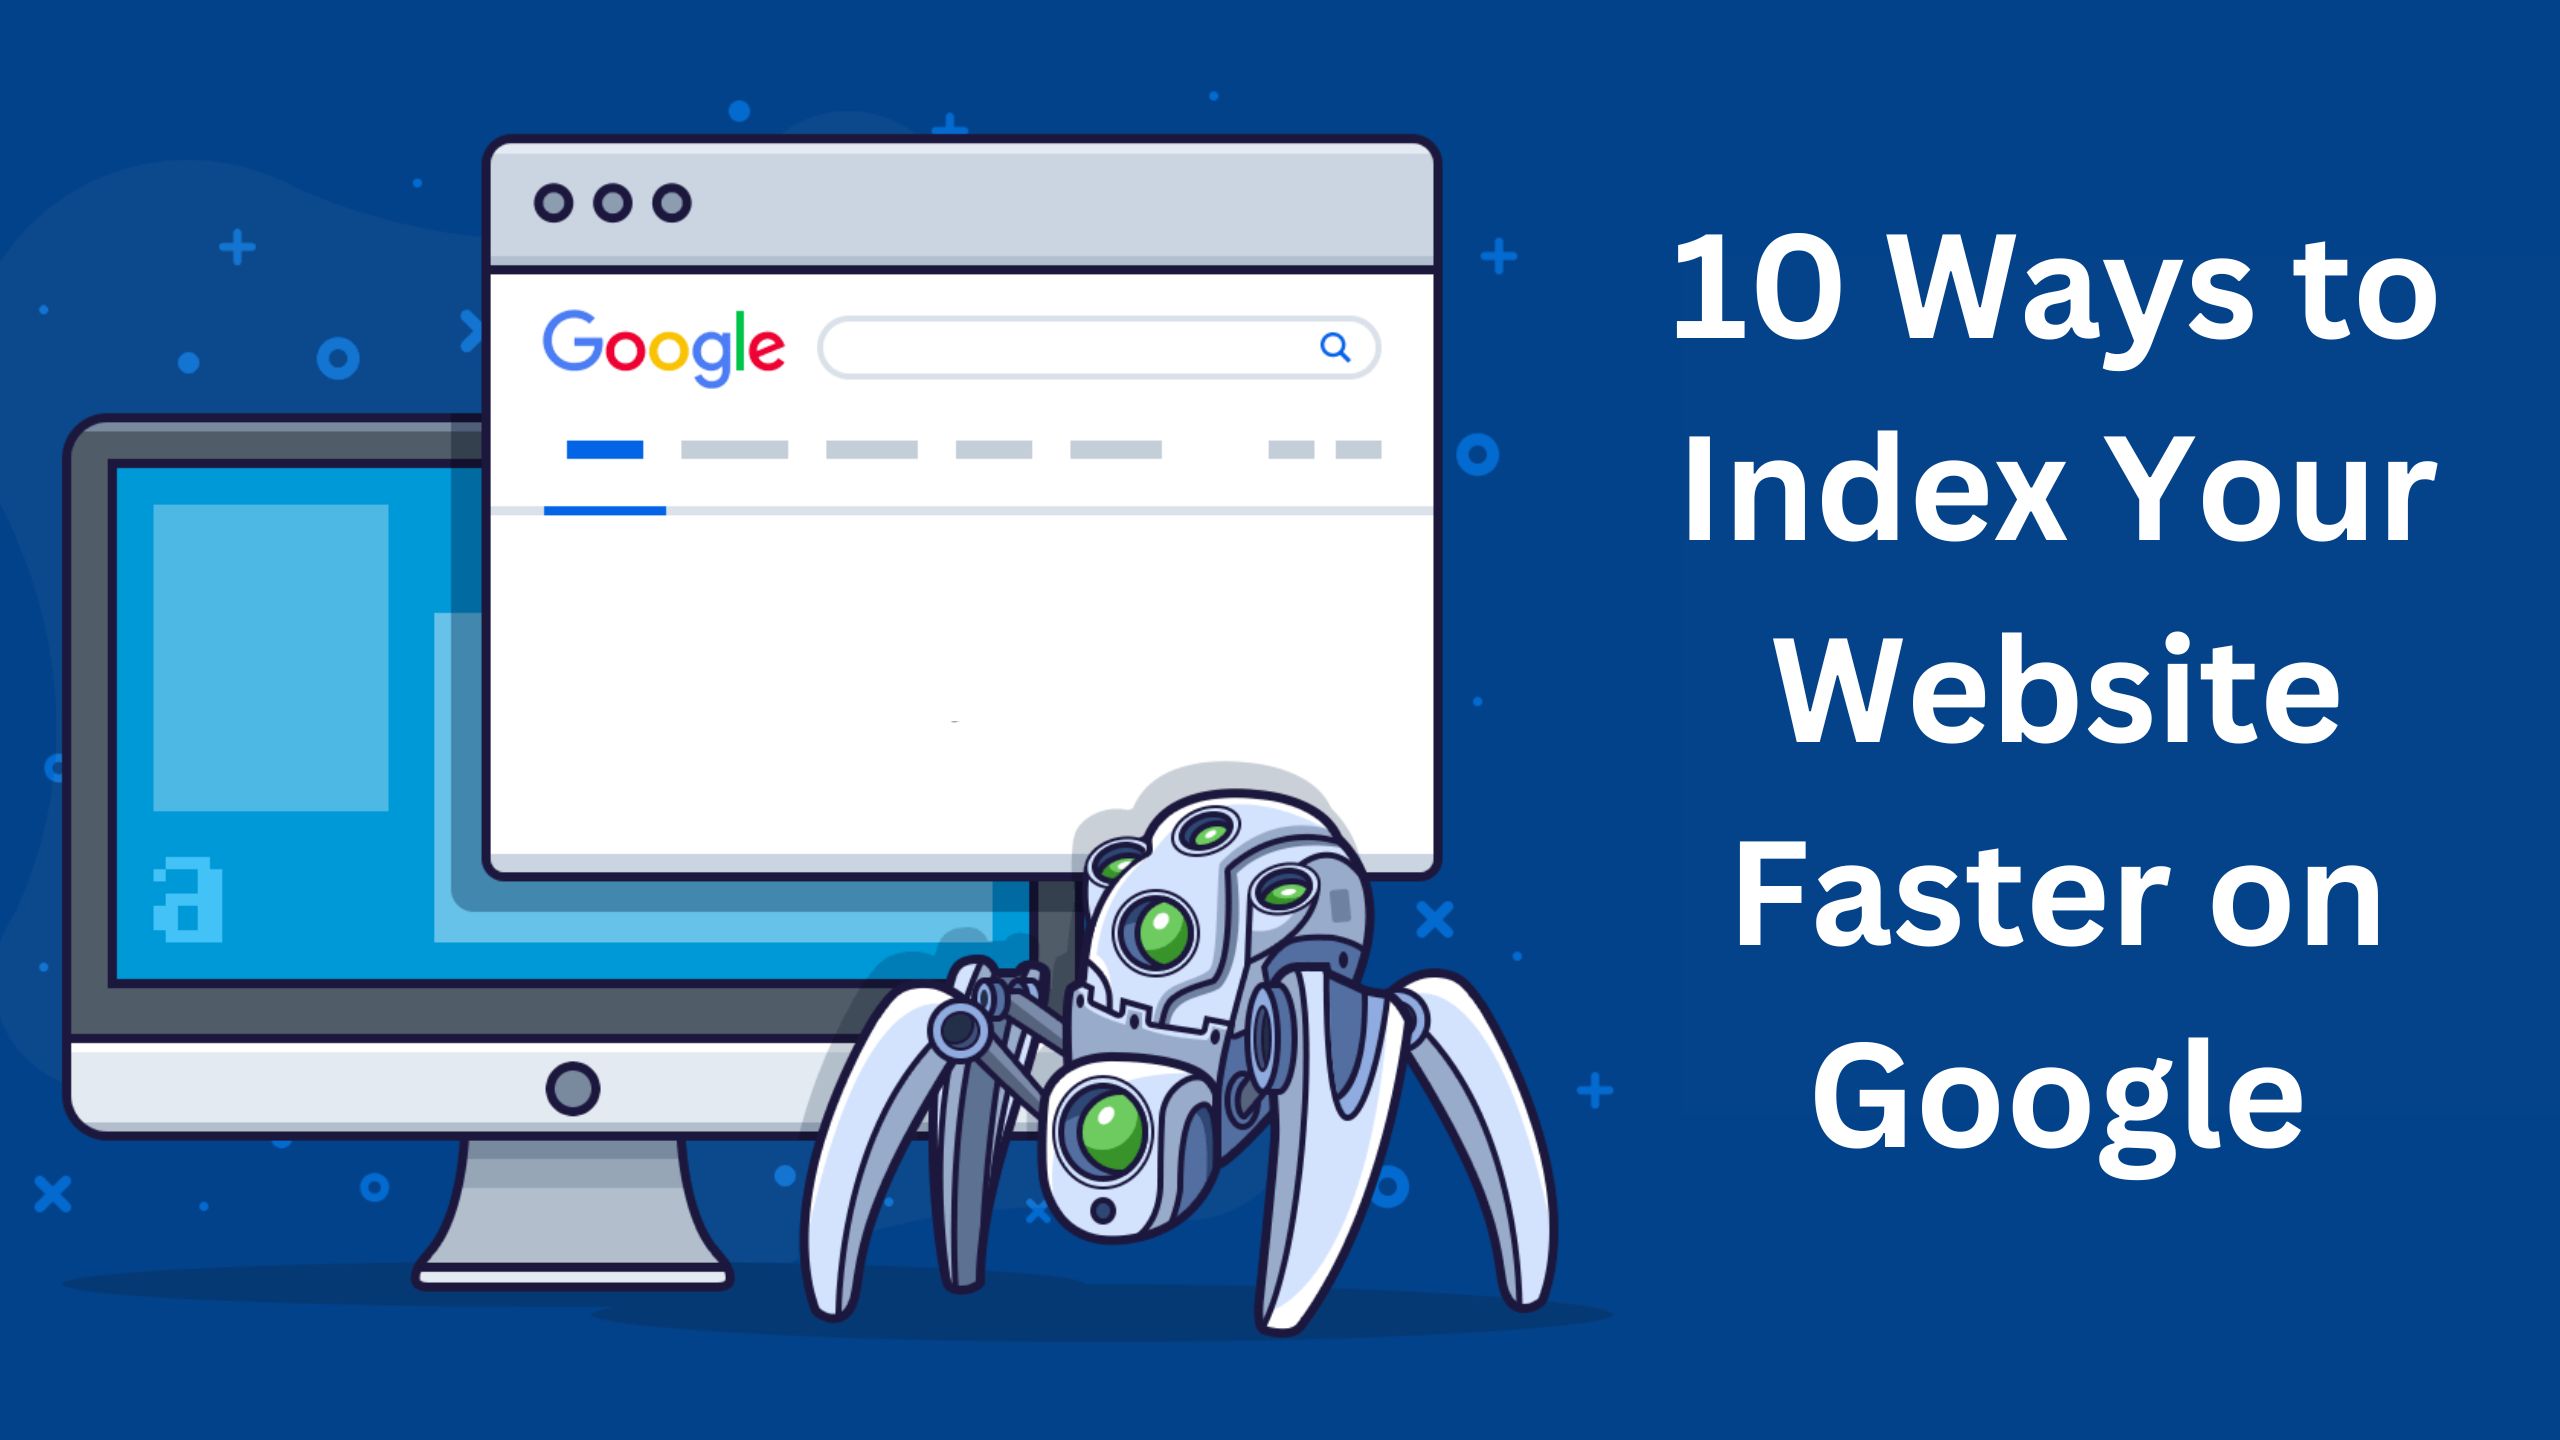 10 Ways to Index Your Website Faster on Google